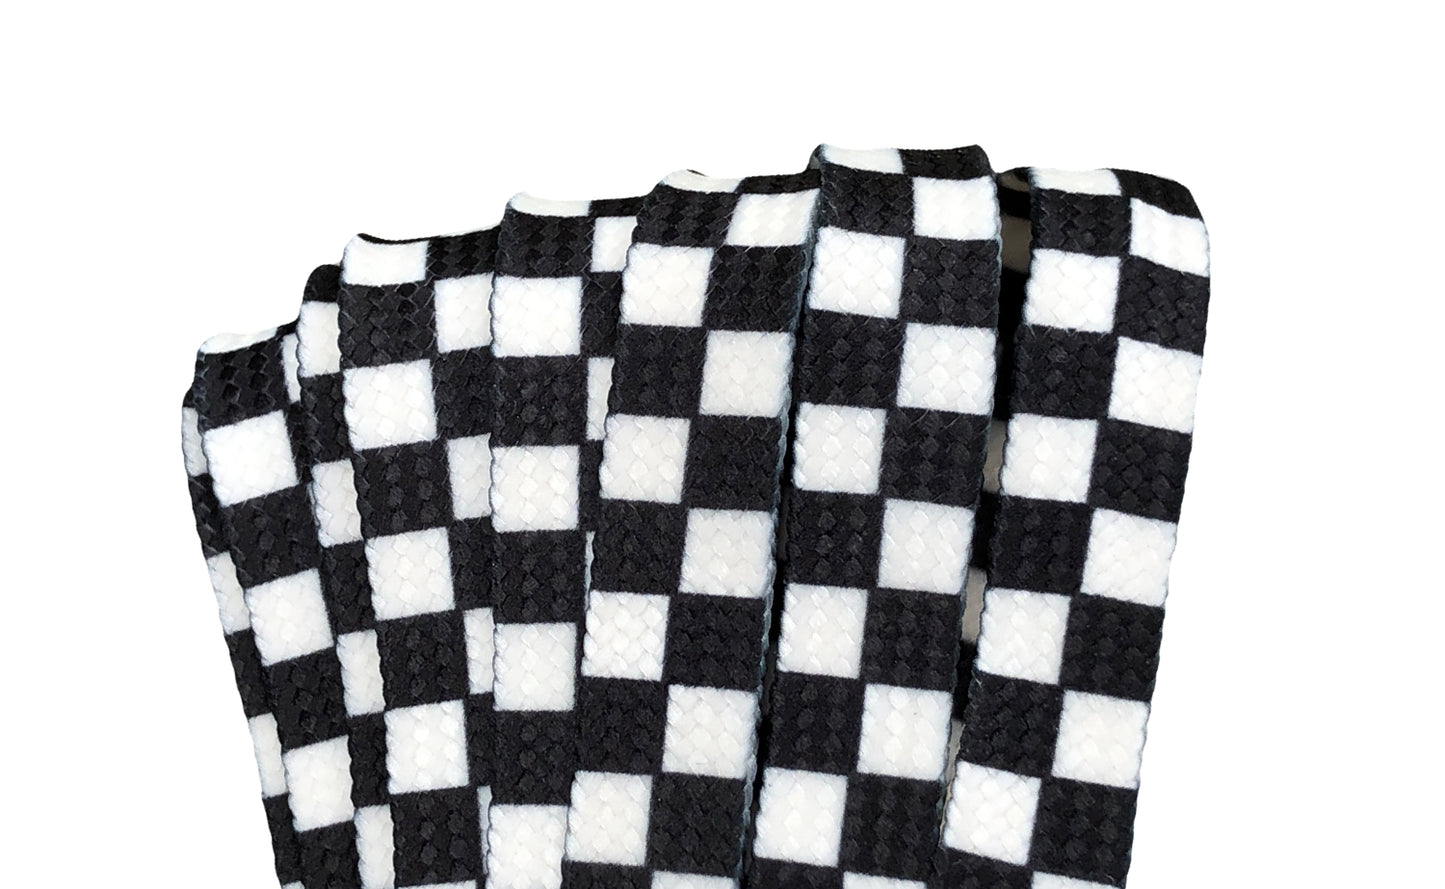 Checkered Black and White – 72 inch (183 cm) STYLE Waxed Shoe and Skate Lace by Derby Laces